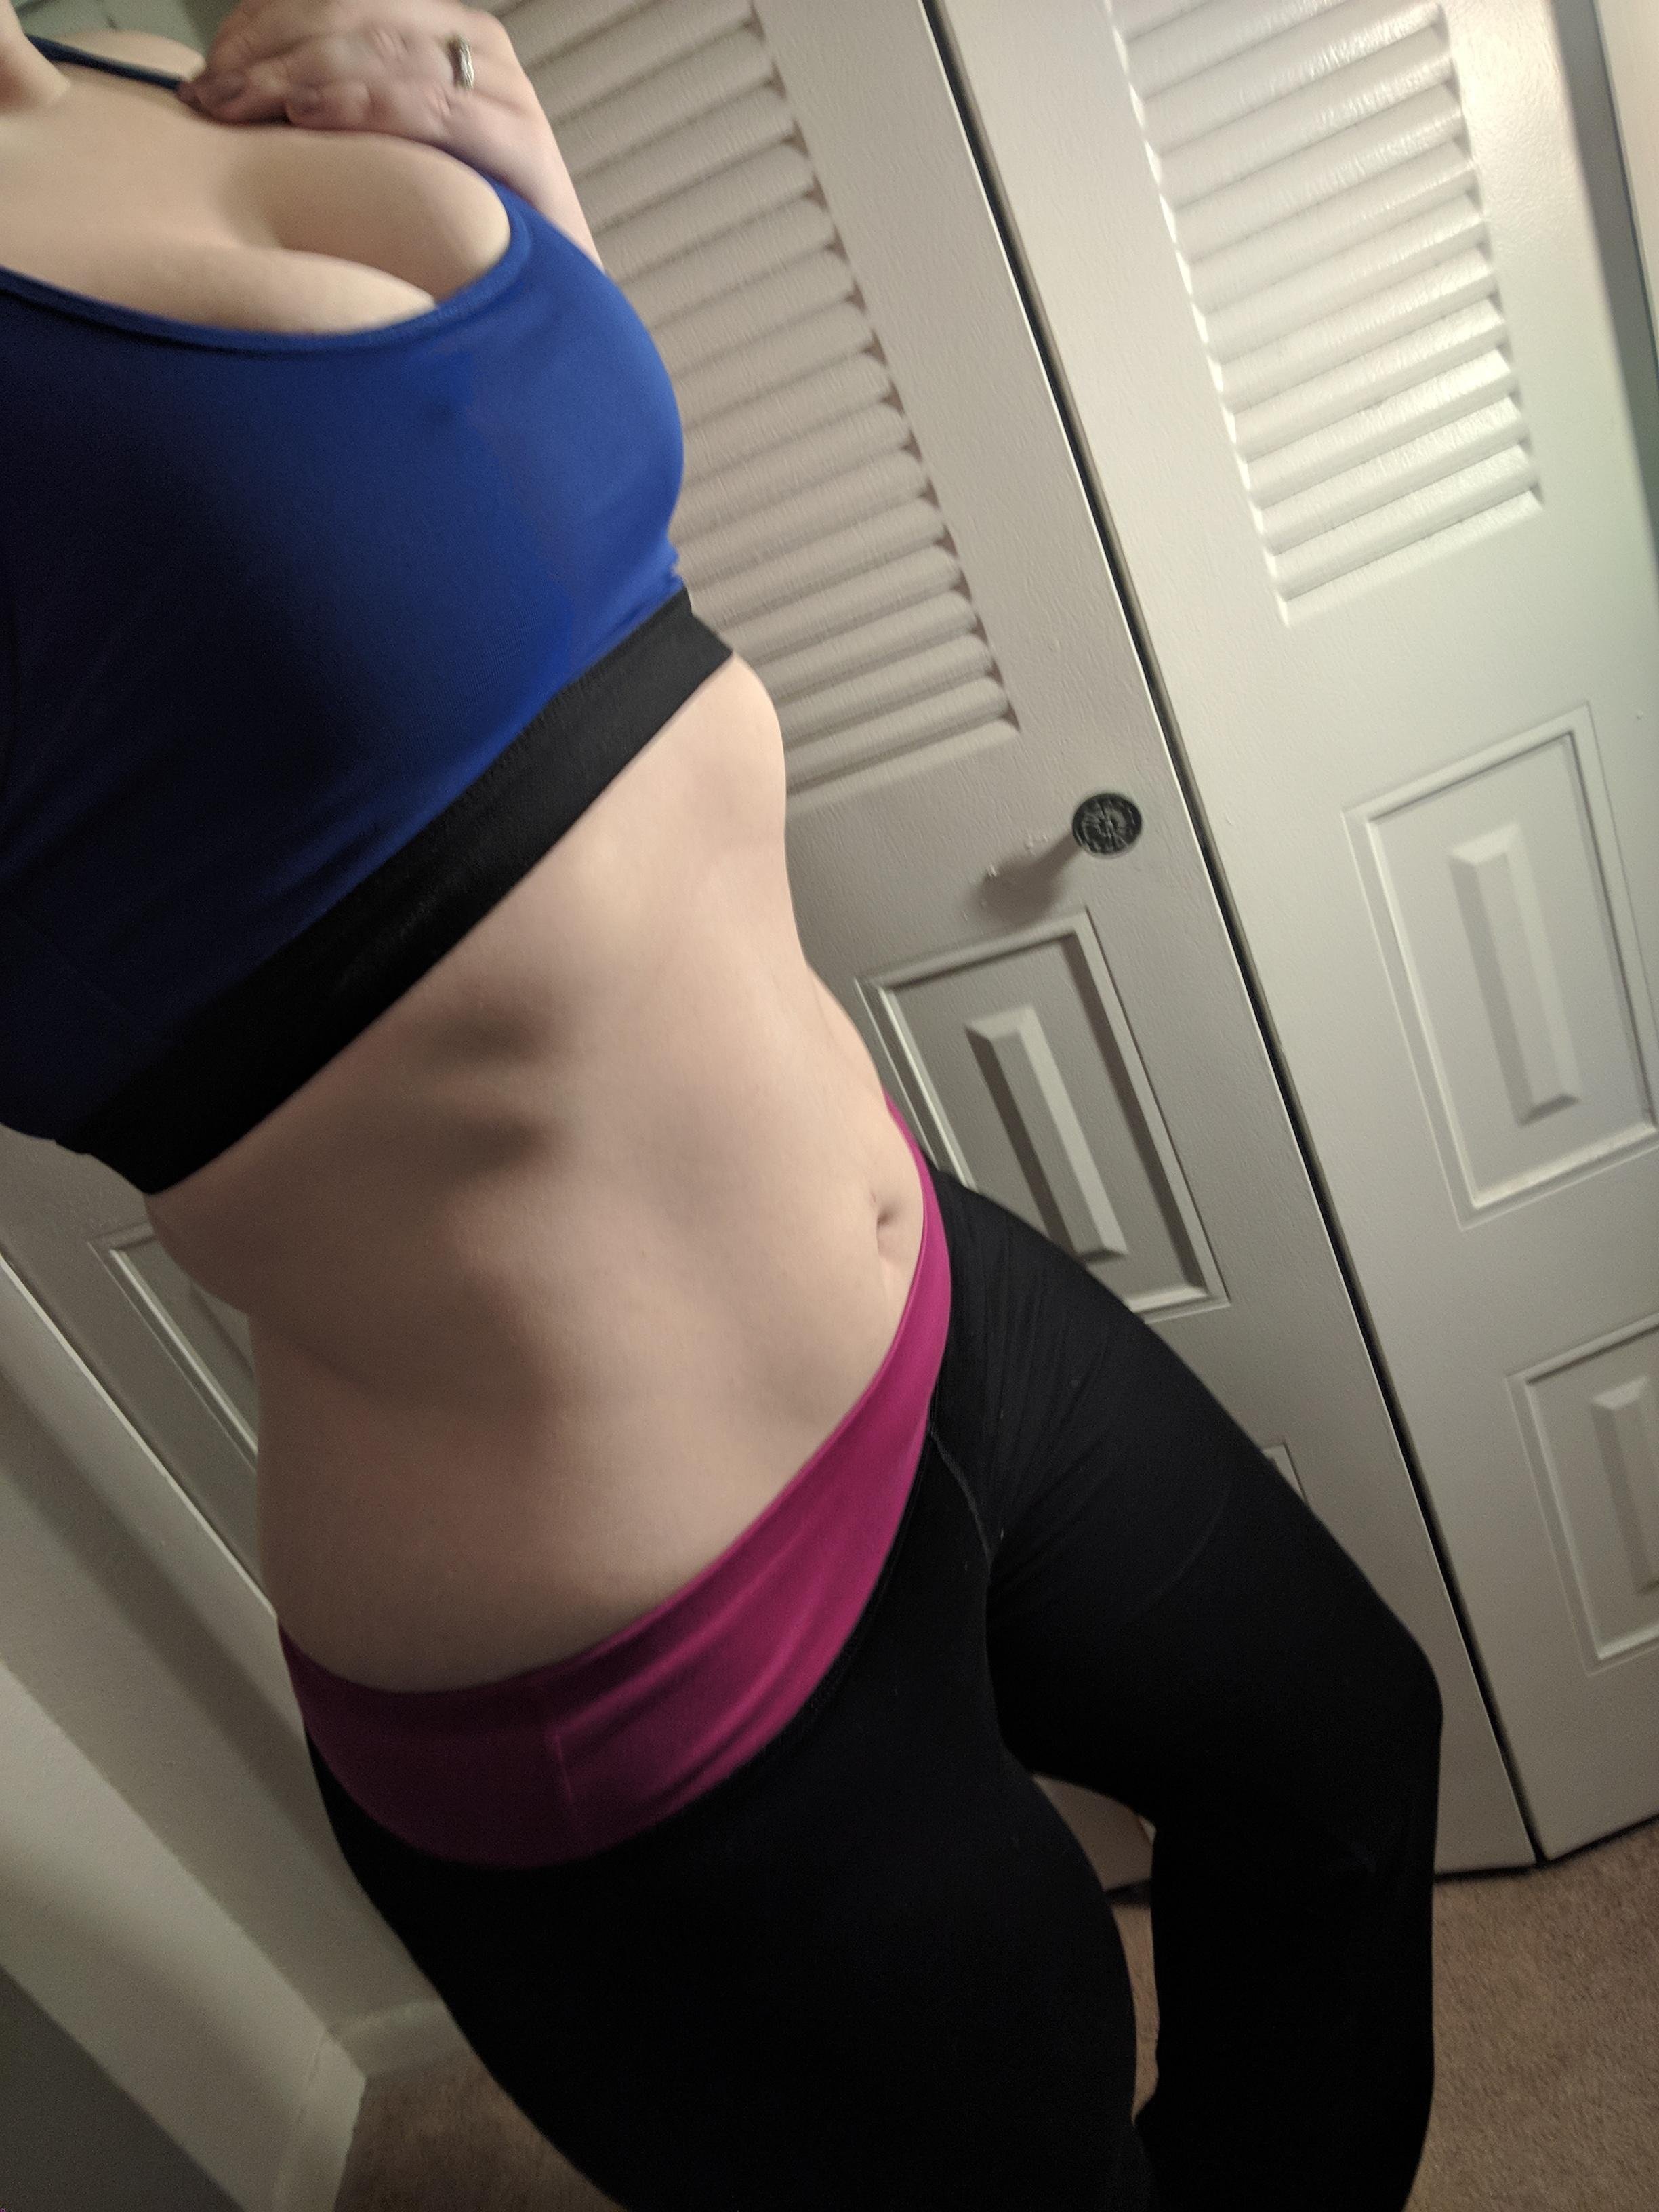 How'd you like a real work out? [F] [OC]